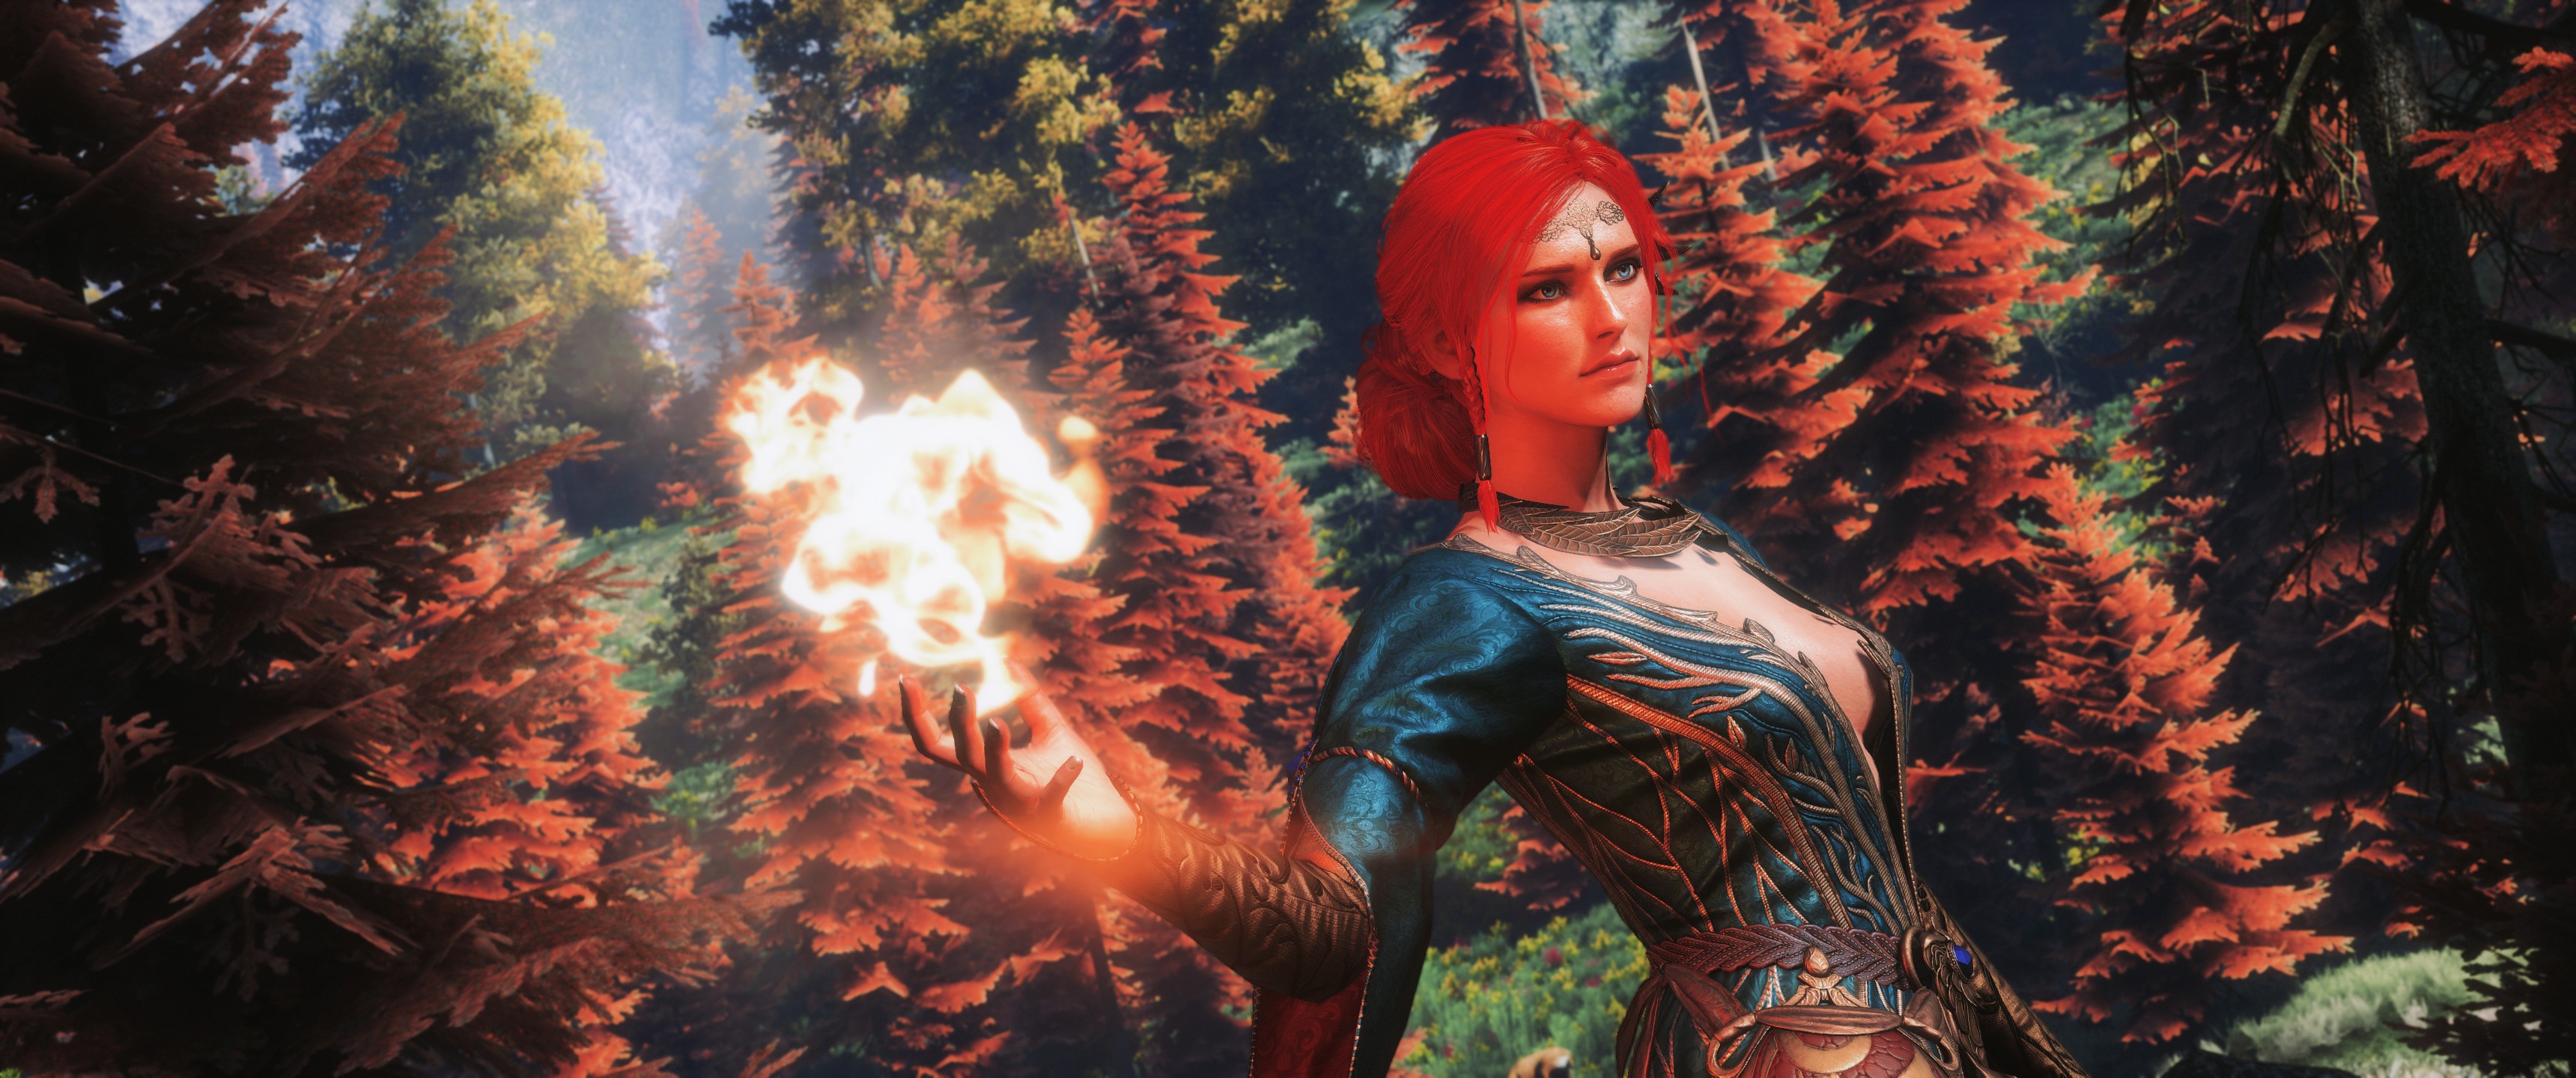 Triss Merigold, Video games, The Witcher Wallpaper